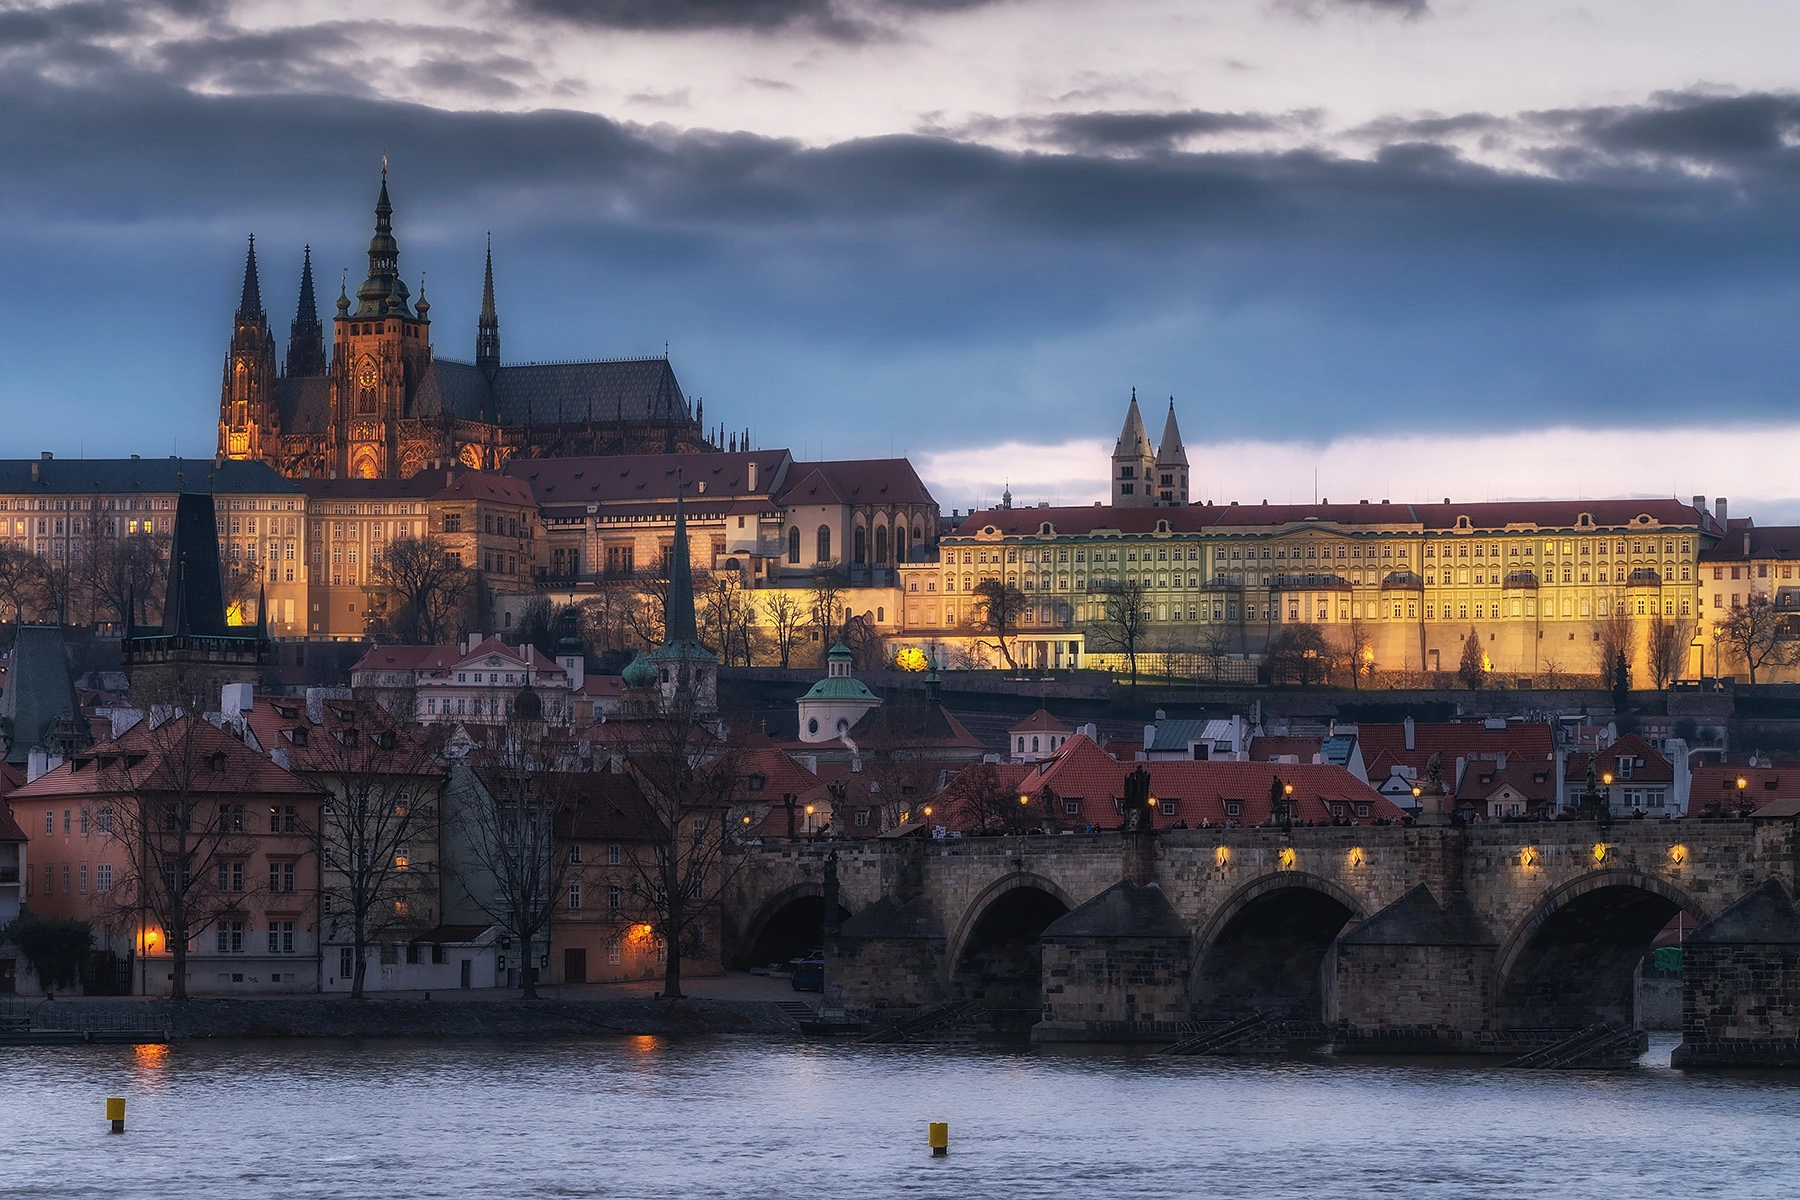 XF50-140mmF2.8 R LM OIS WR + 1.4x sample photo. Evening in prague photography